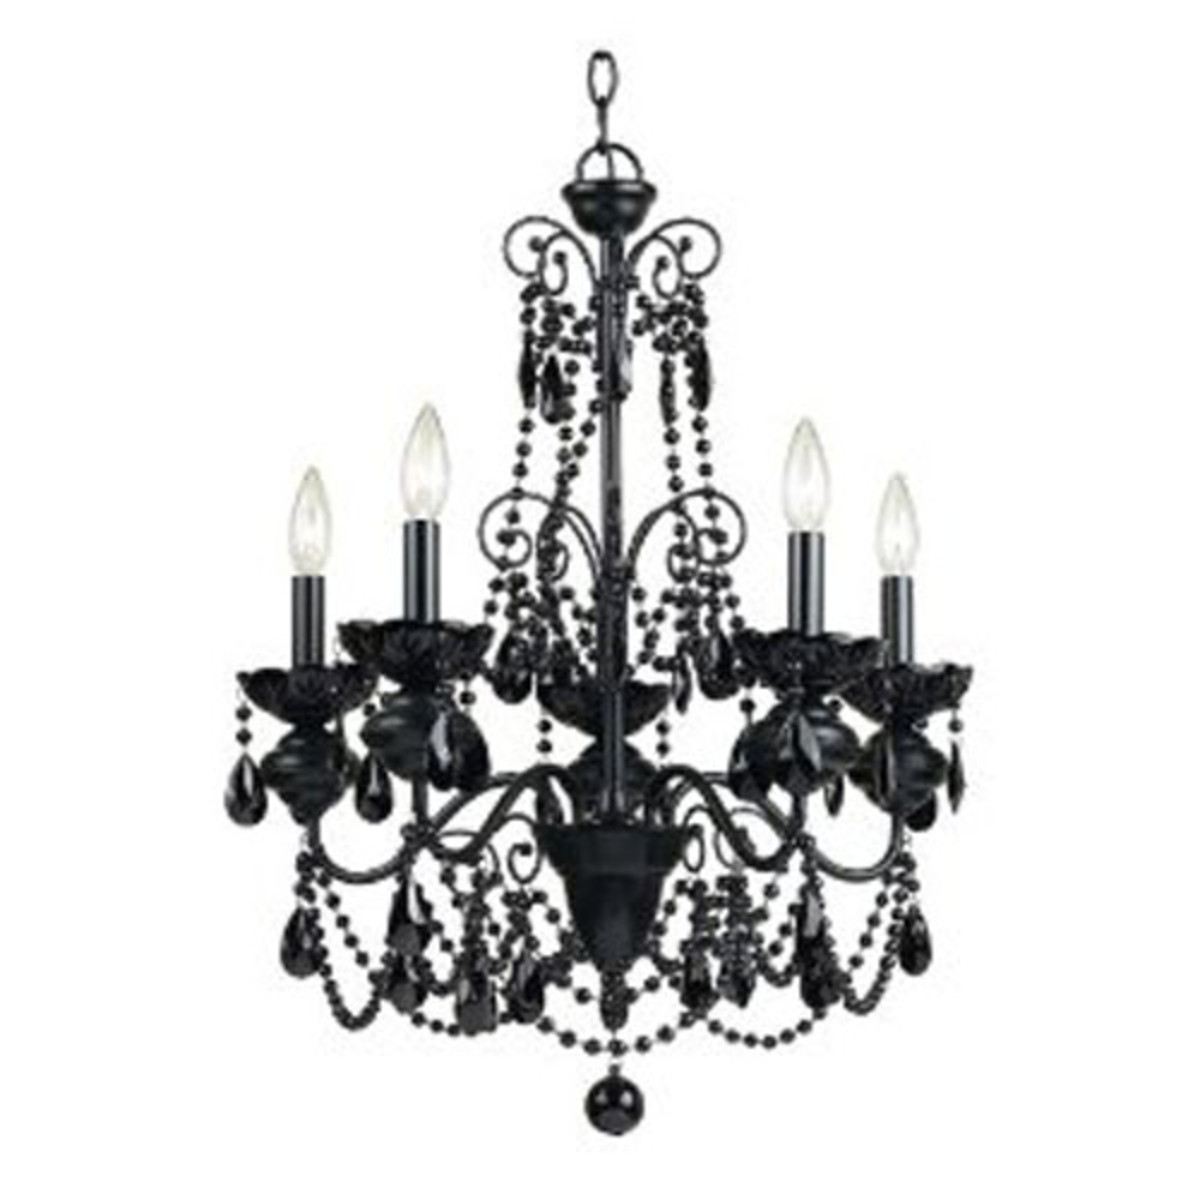 black chandelier would be unexpected and fresh in a pastel colored ...